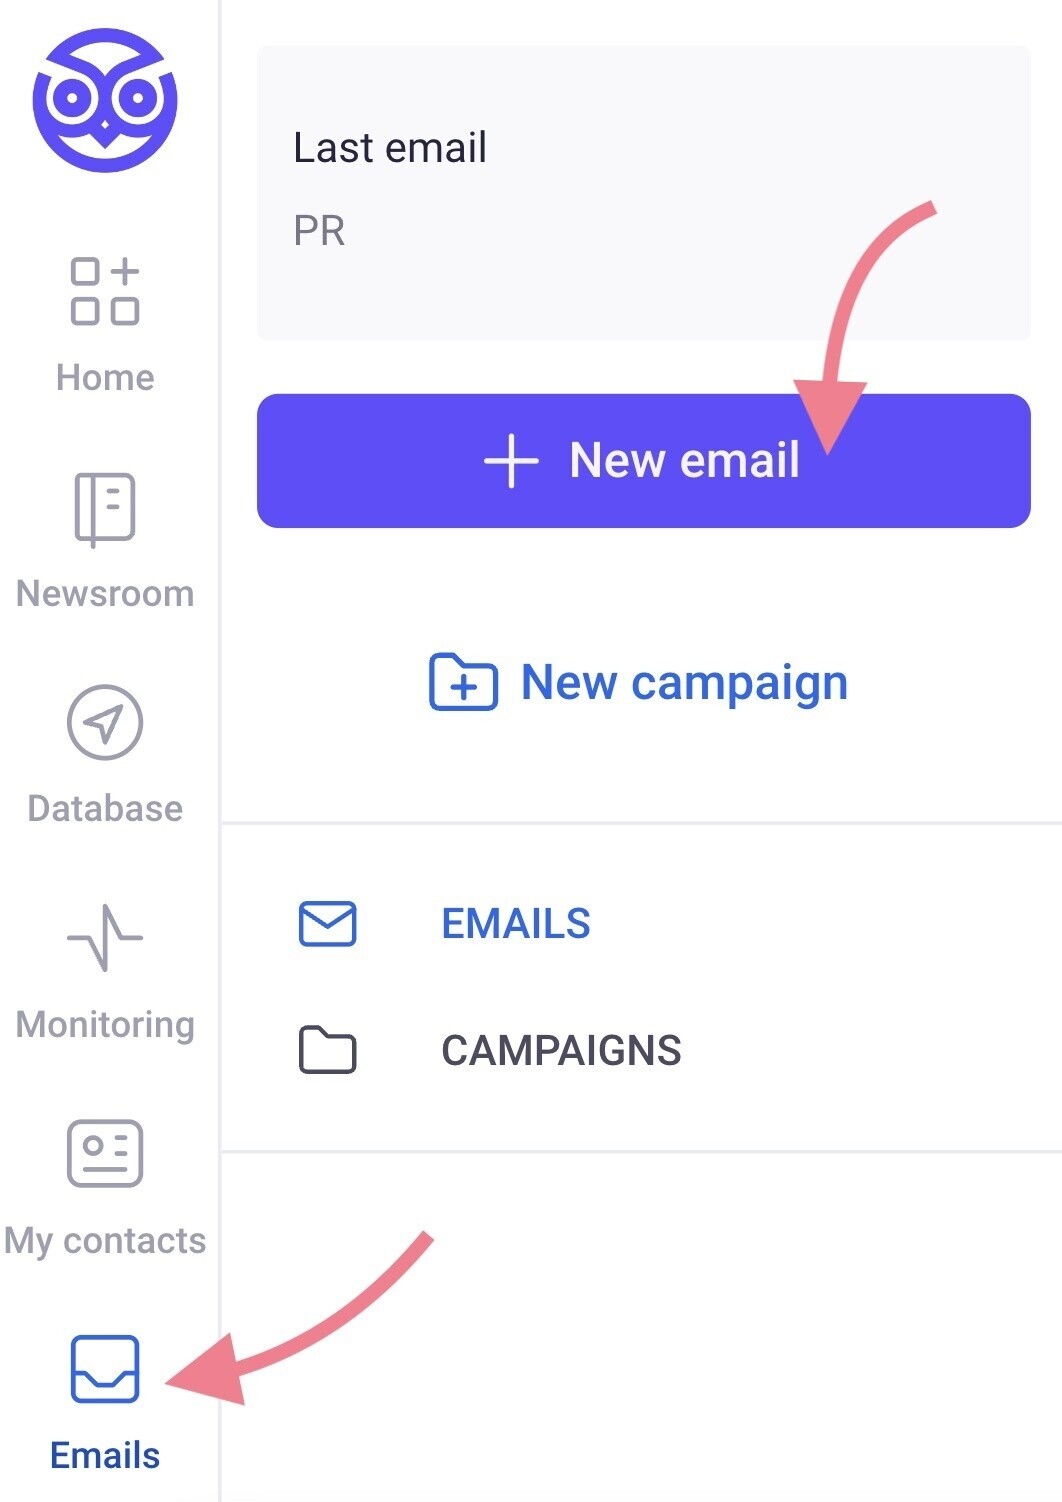 create a new email in Prowly